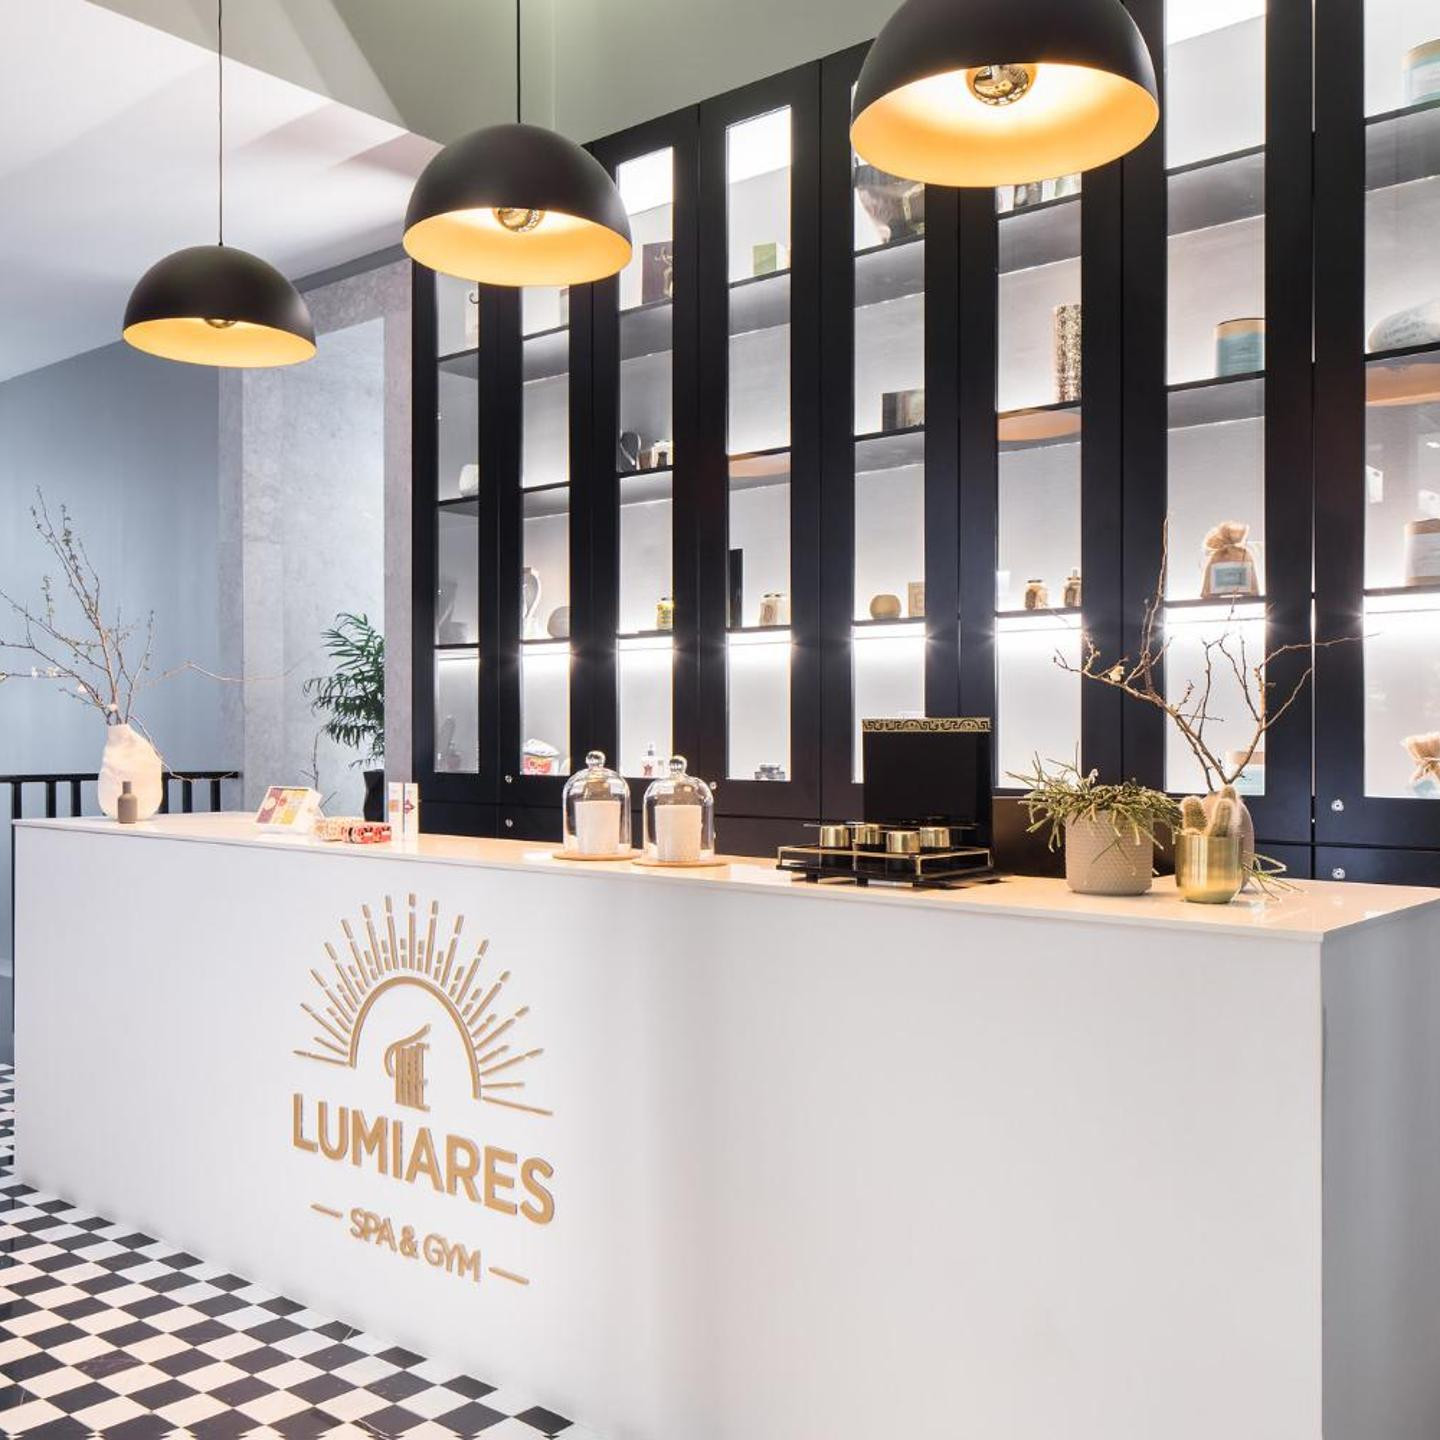 The Lumiares Hotel & Spa - Small Luxury Hotels Of The World